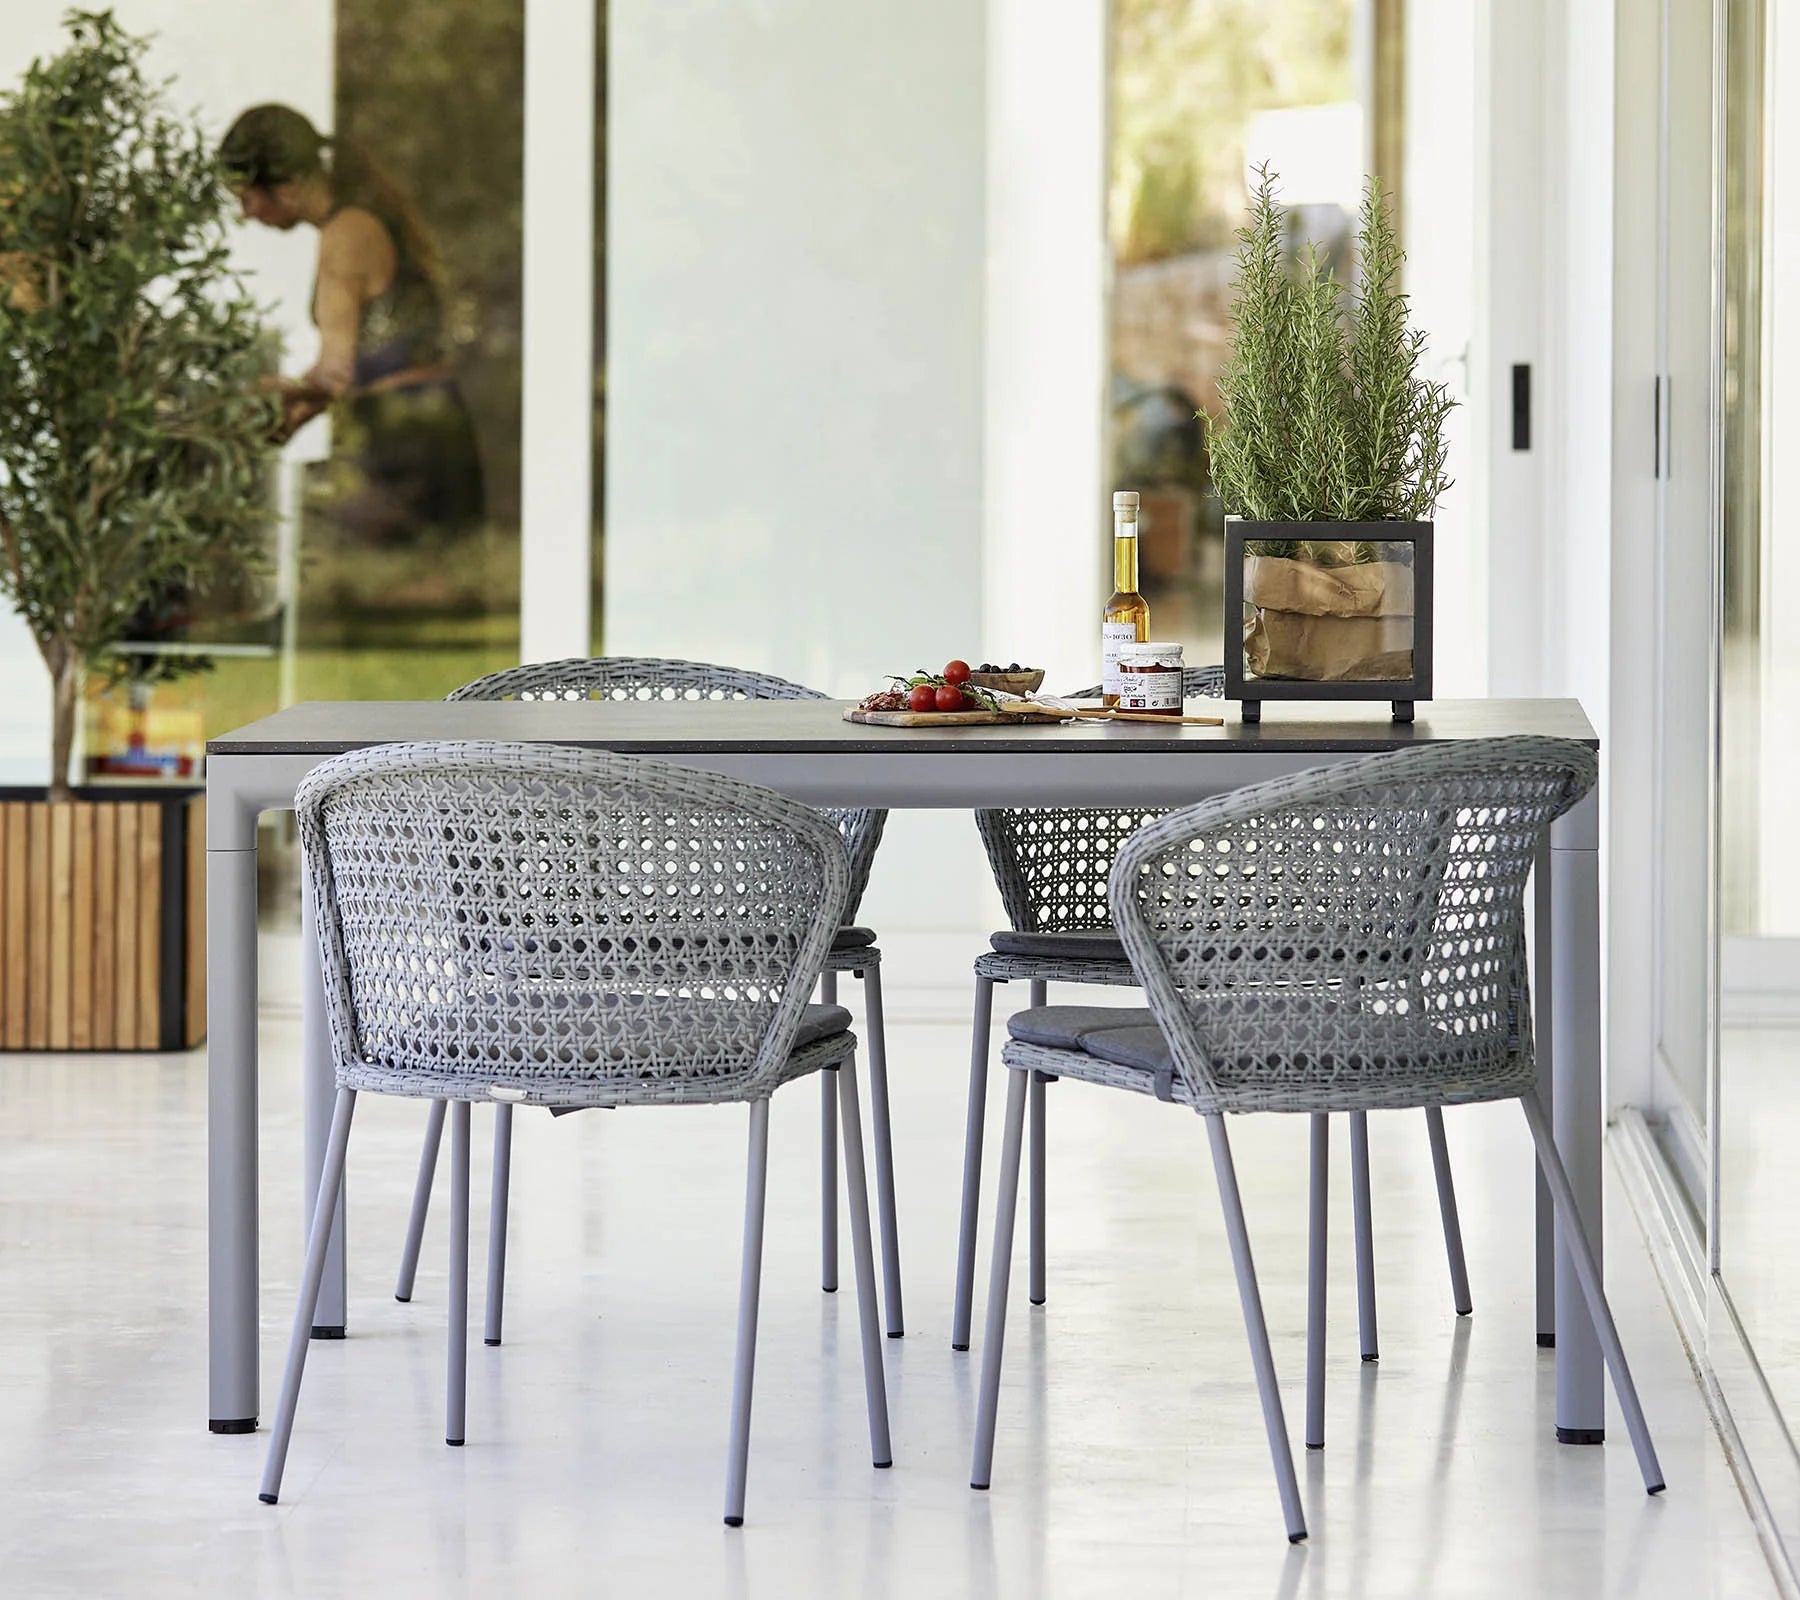 Boxhill's Lean Stackable Outdoor Garden Chair French Weave lifestyle image at patio with a dining table and random things on top